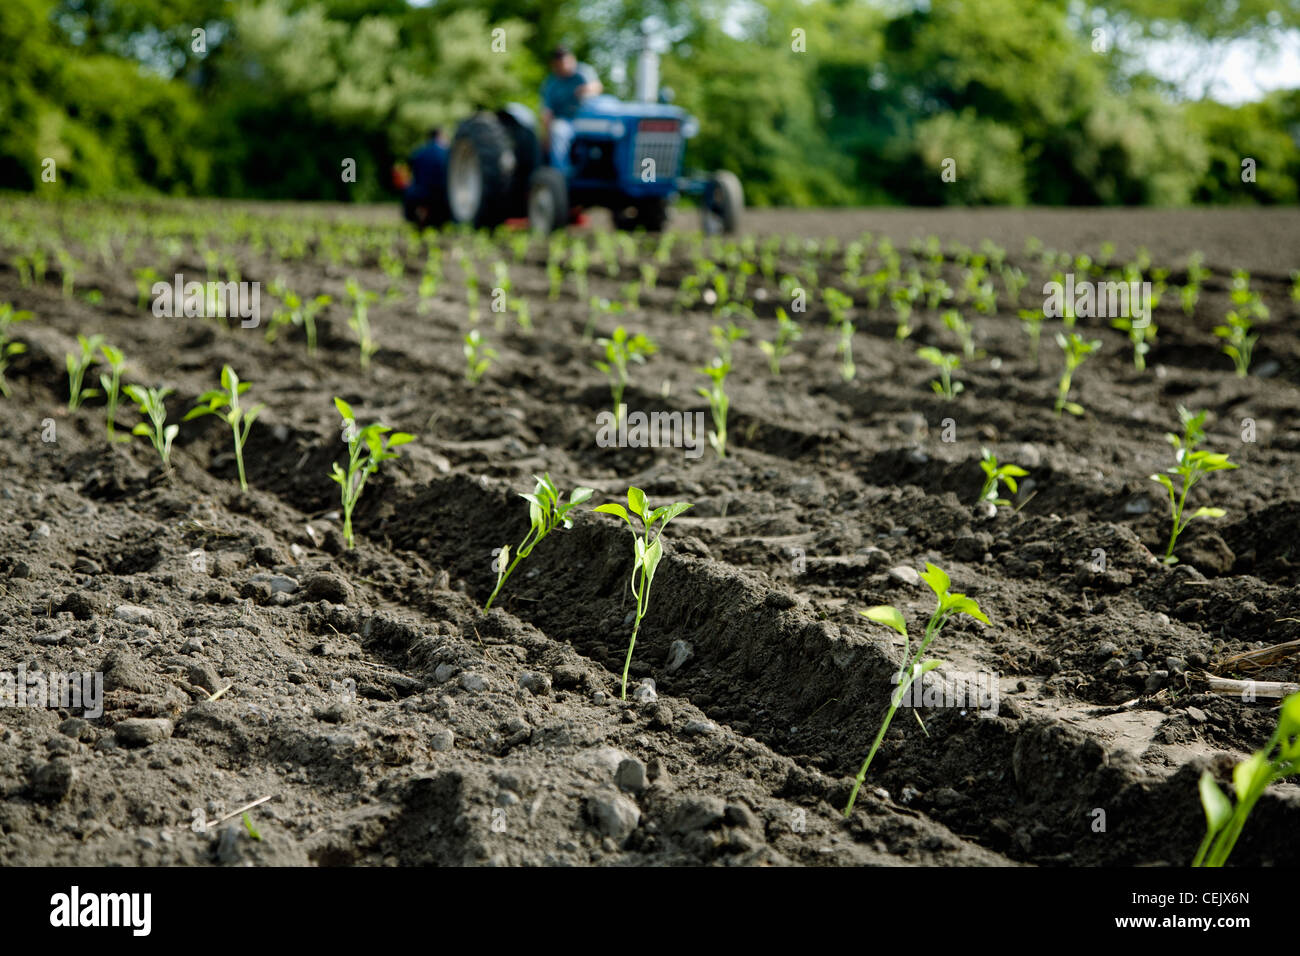 Newly transplanted pepper plant seedlings at a local family produce farm with the tractor and transplanter in the background. Stock Photo